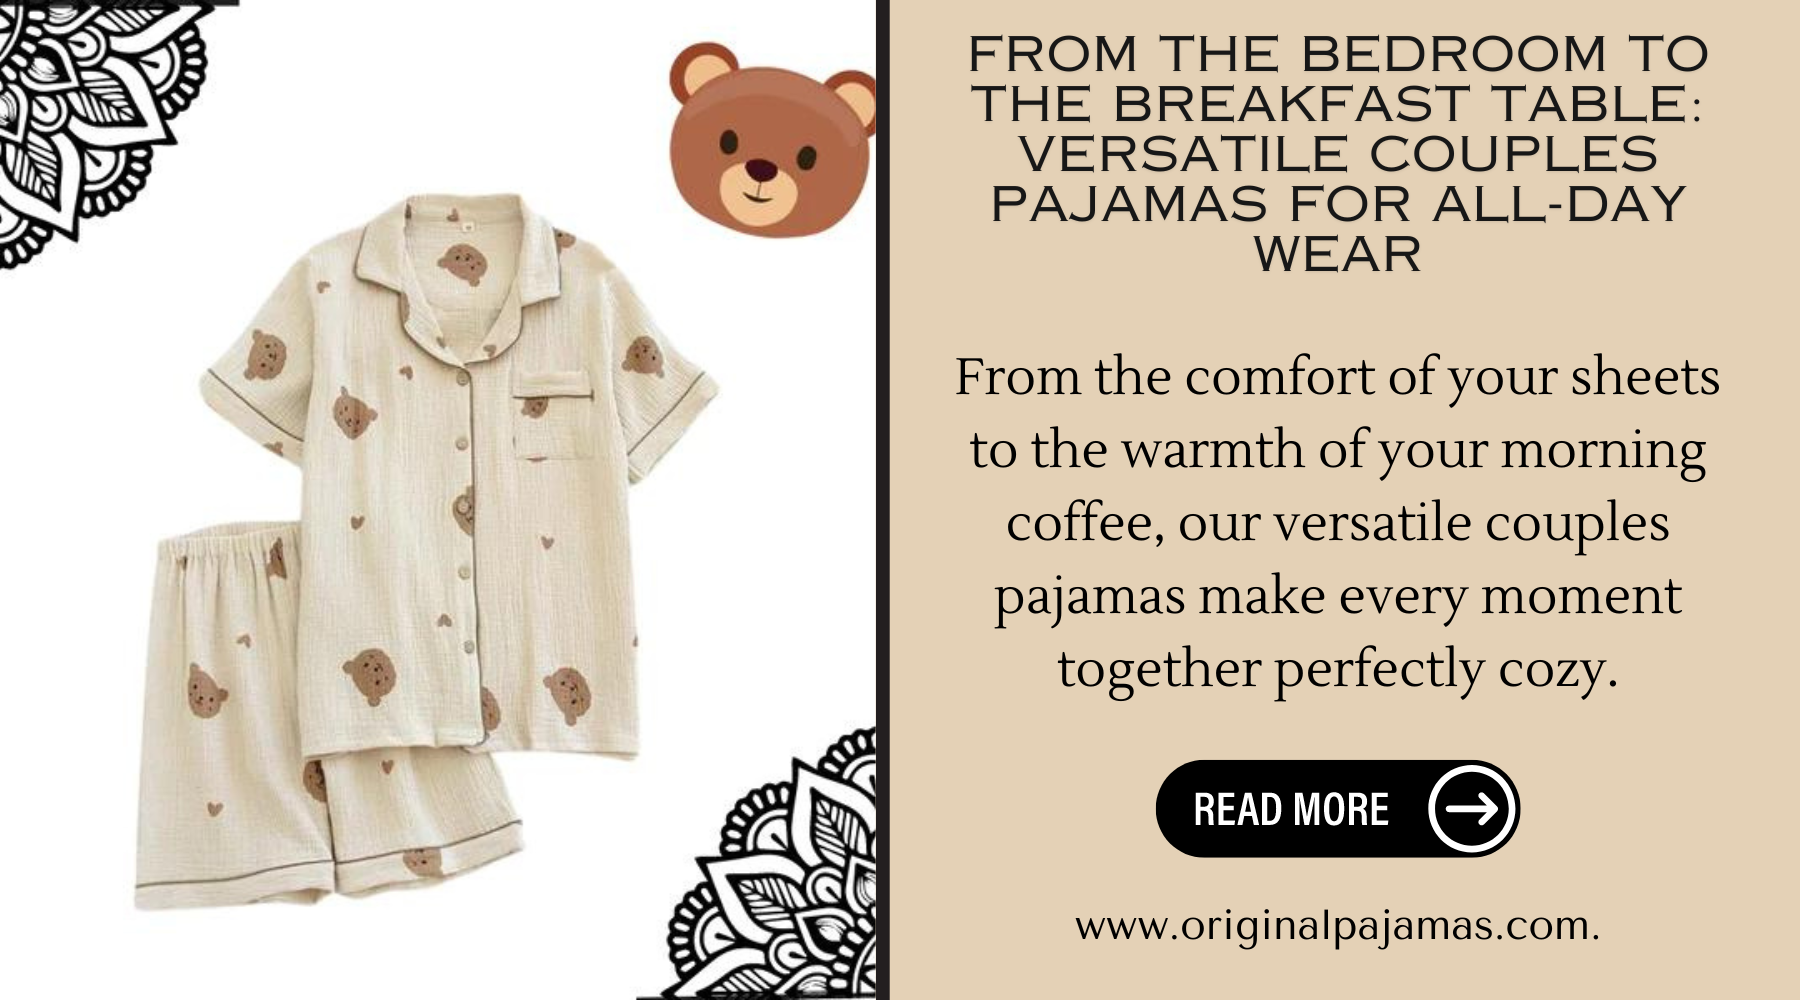 From The Bedroom To The Breakfast Table: Versatile Couples Pajamas For All-Day Wear